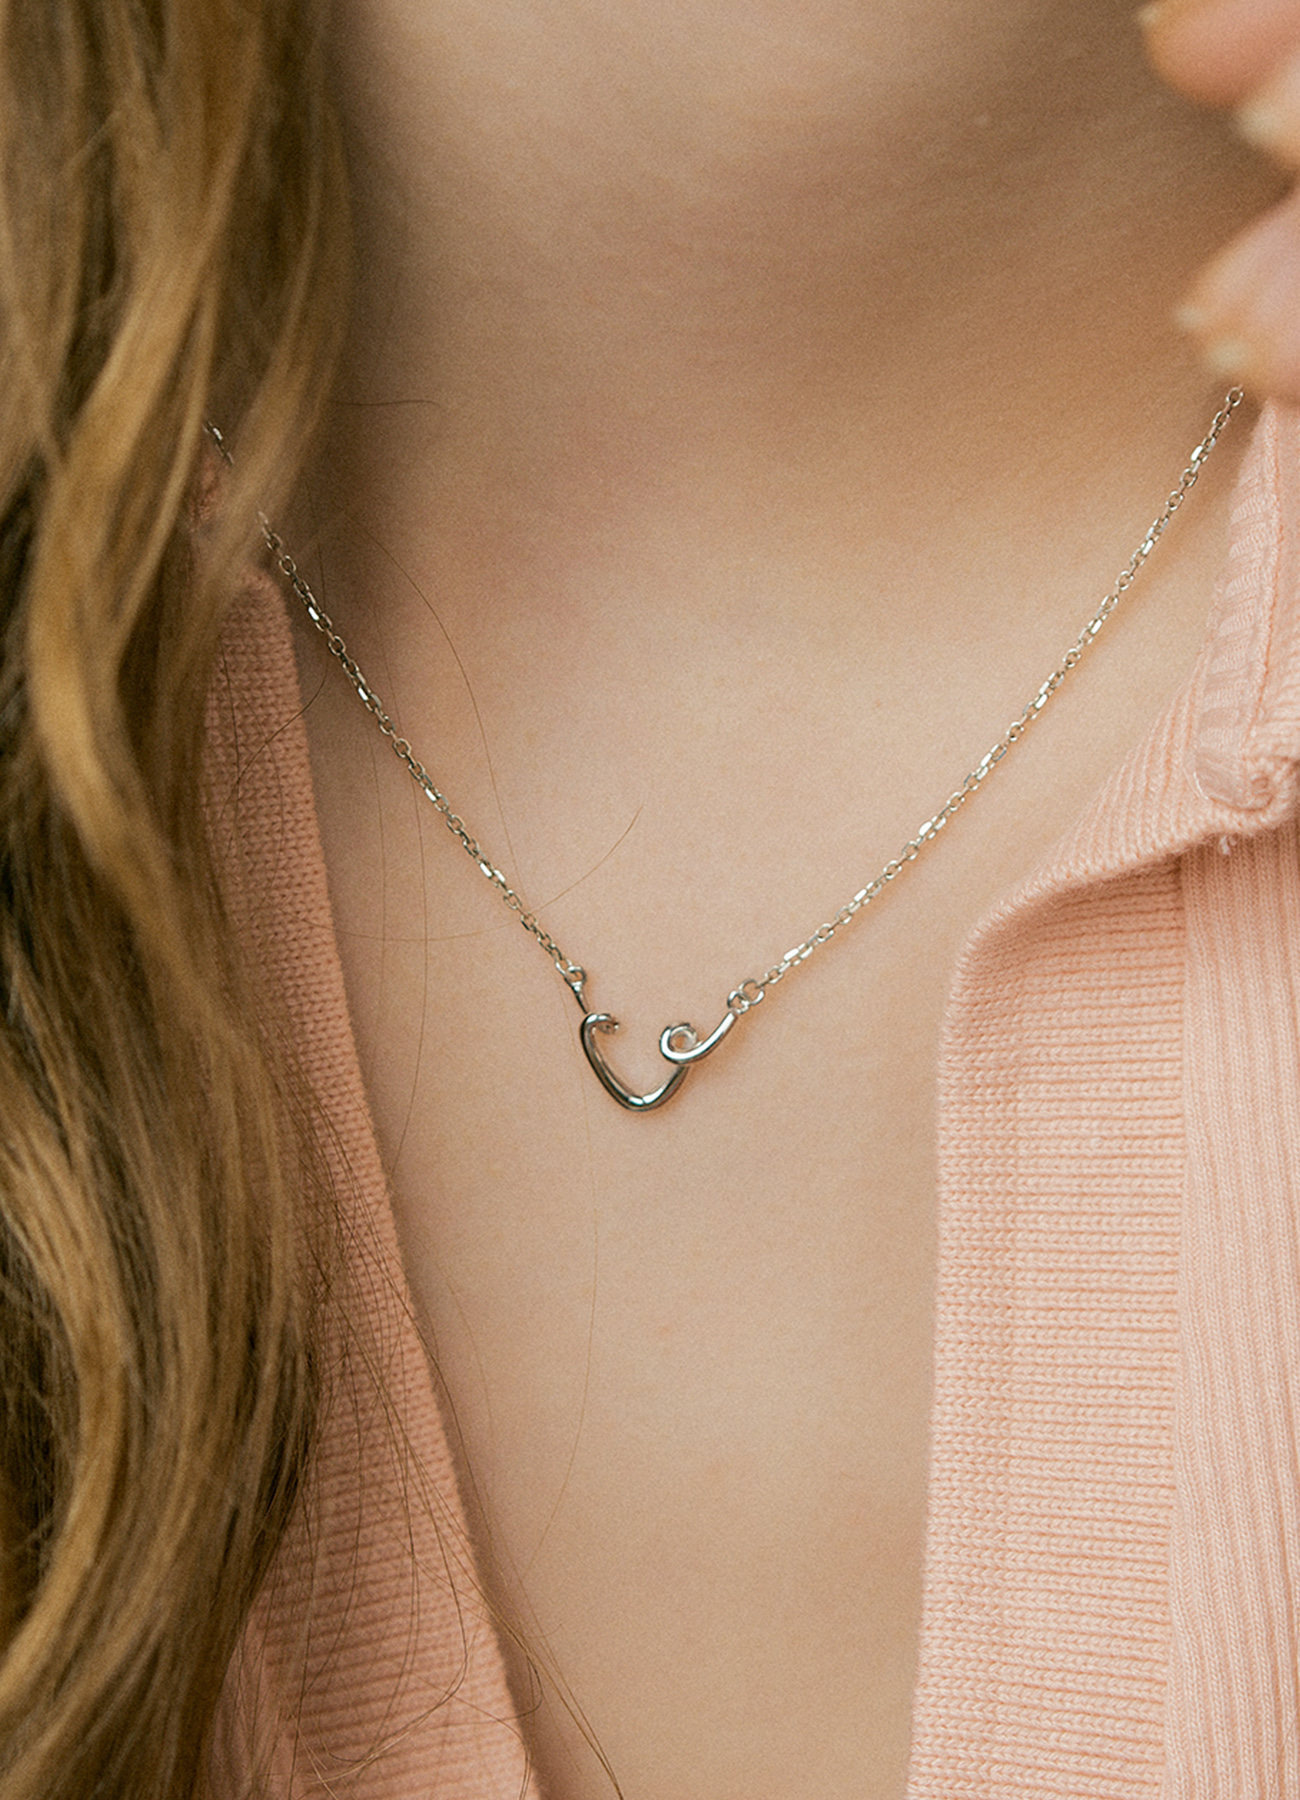 Share the Love Silver925 Necklace